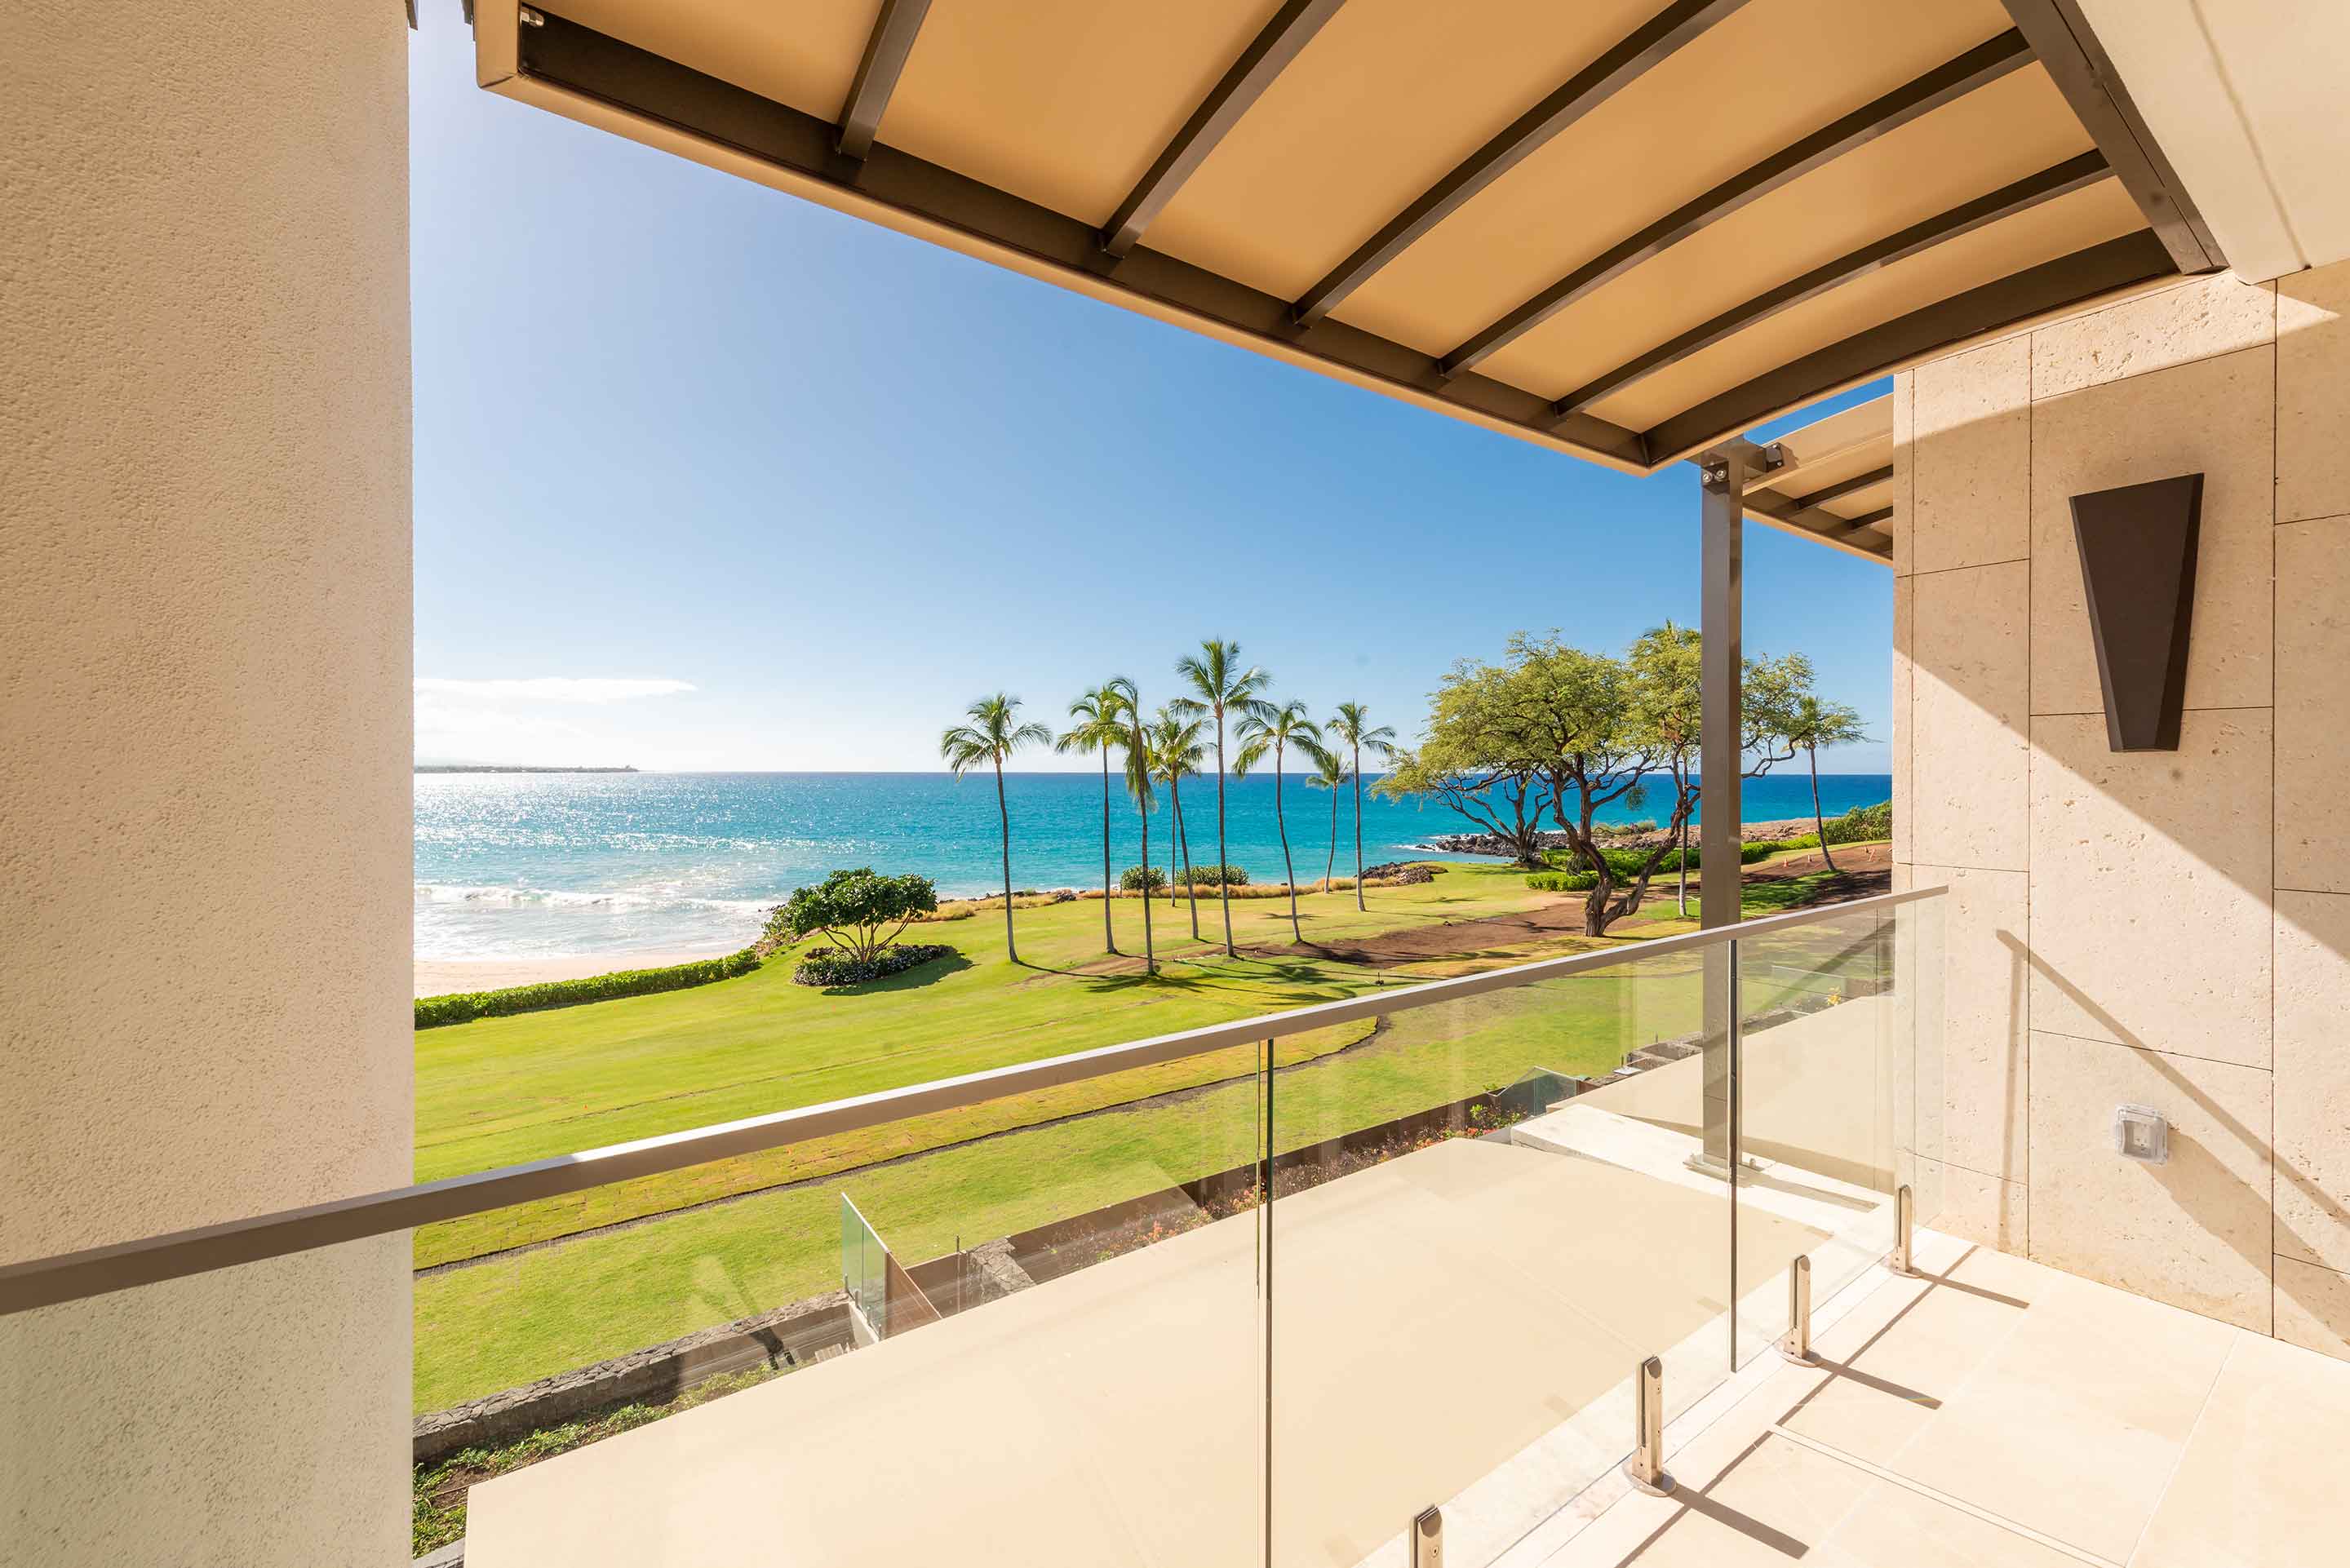 Property Image 2 - Inviting open concept beachside living at Hapuna Beach Residence B33